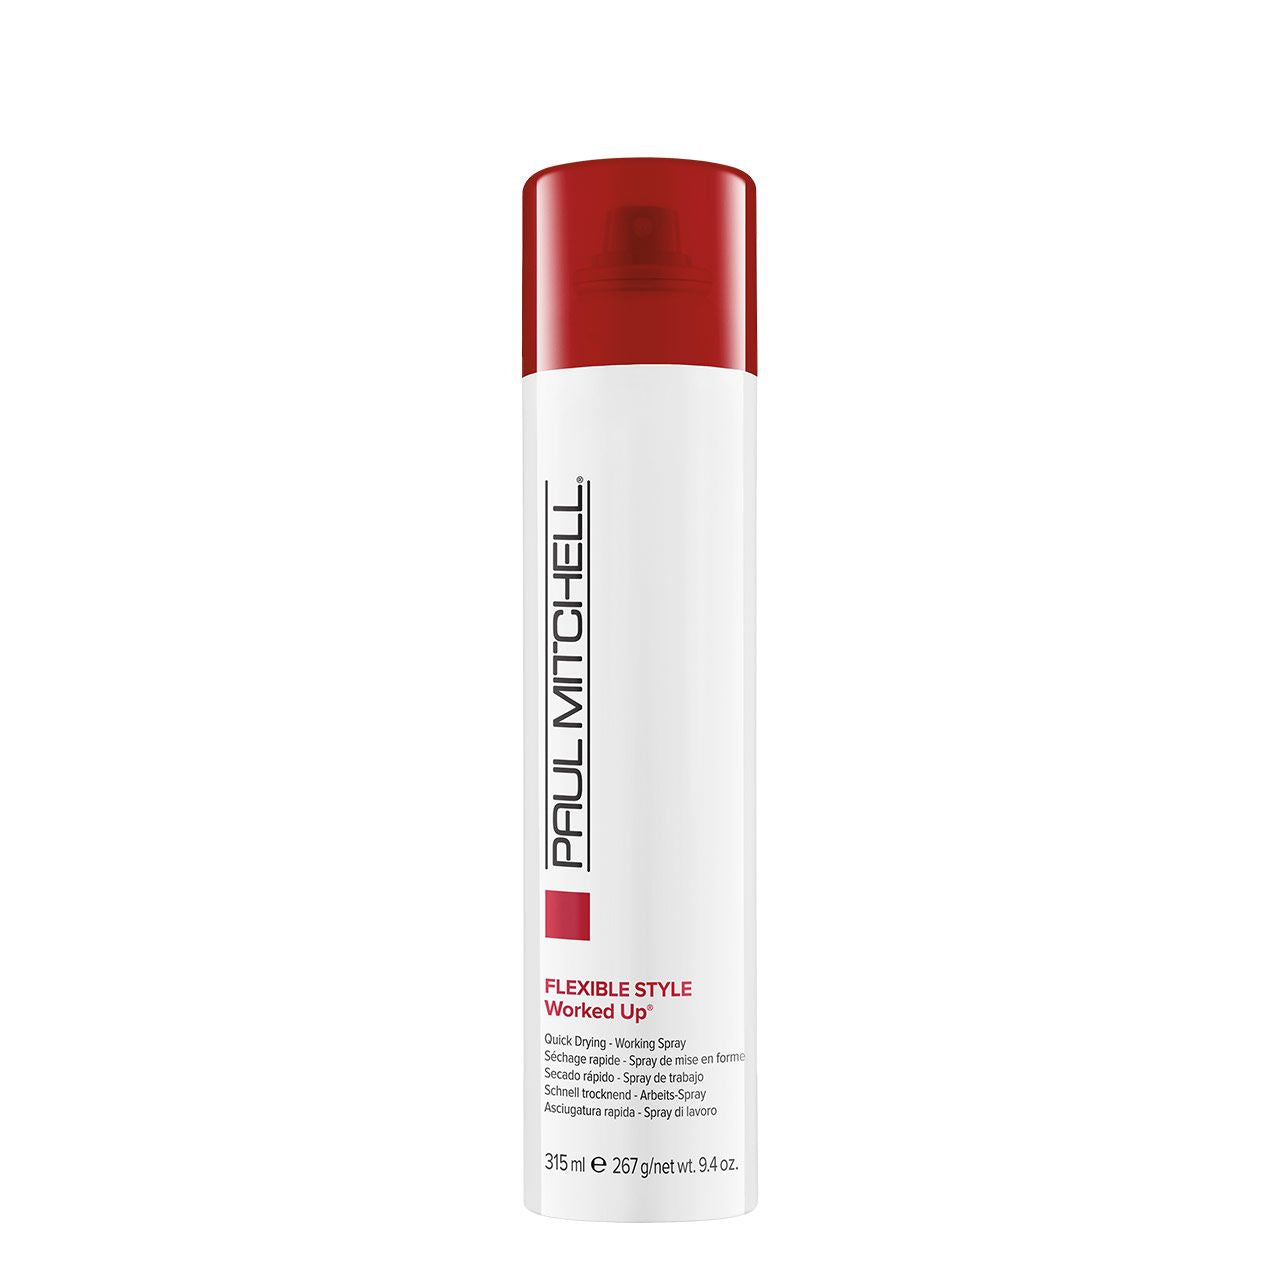 Paul Mitchell Worked Up 315ml [DEL]